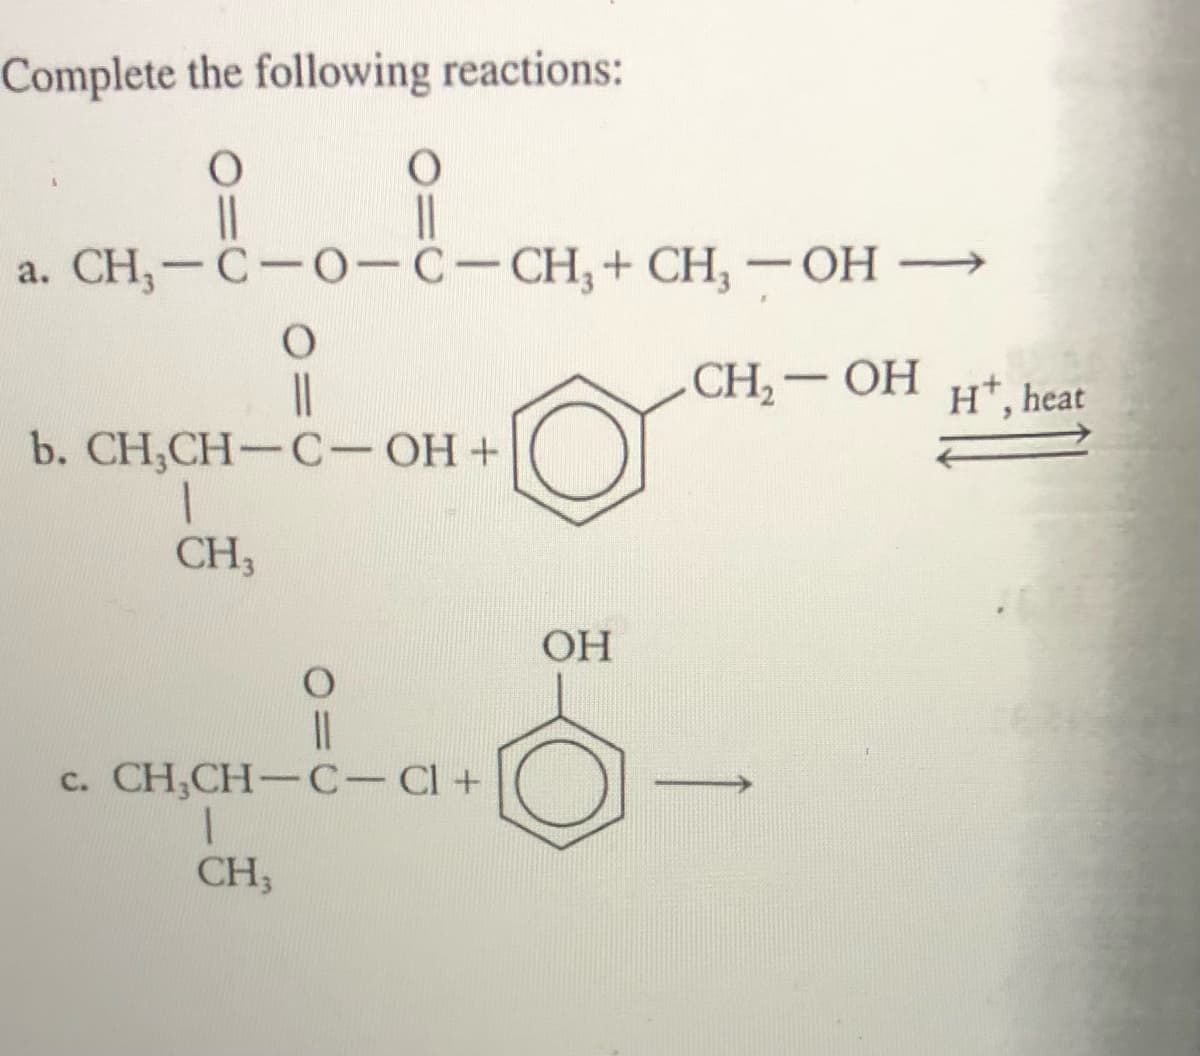 Complete the following reactions:
a. CH,-C-0-C-CH,+ CH, -OH –→
CH, — ОН
H*, heat
b. CH,CH— C-ОН +
CH3
OH
c. CH,CH-C-Cl+
CH3
